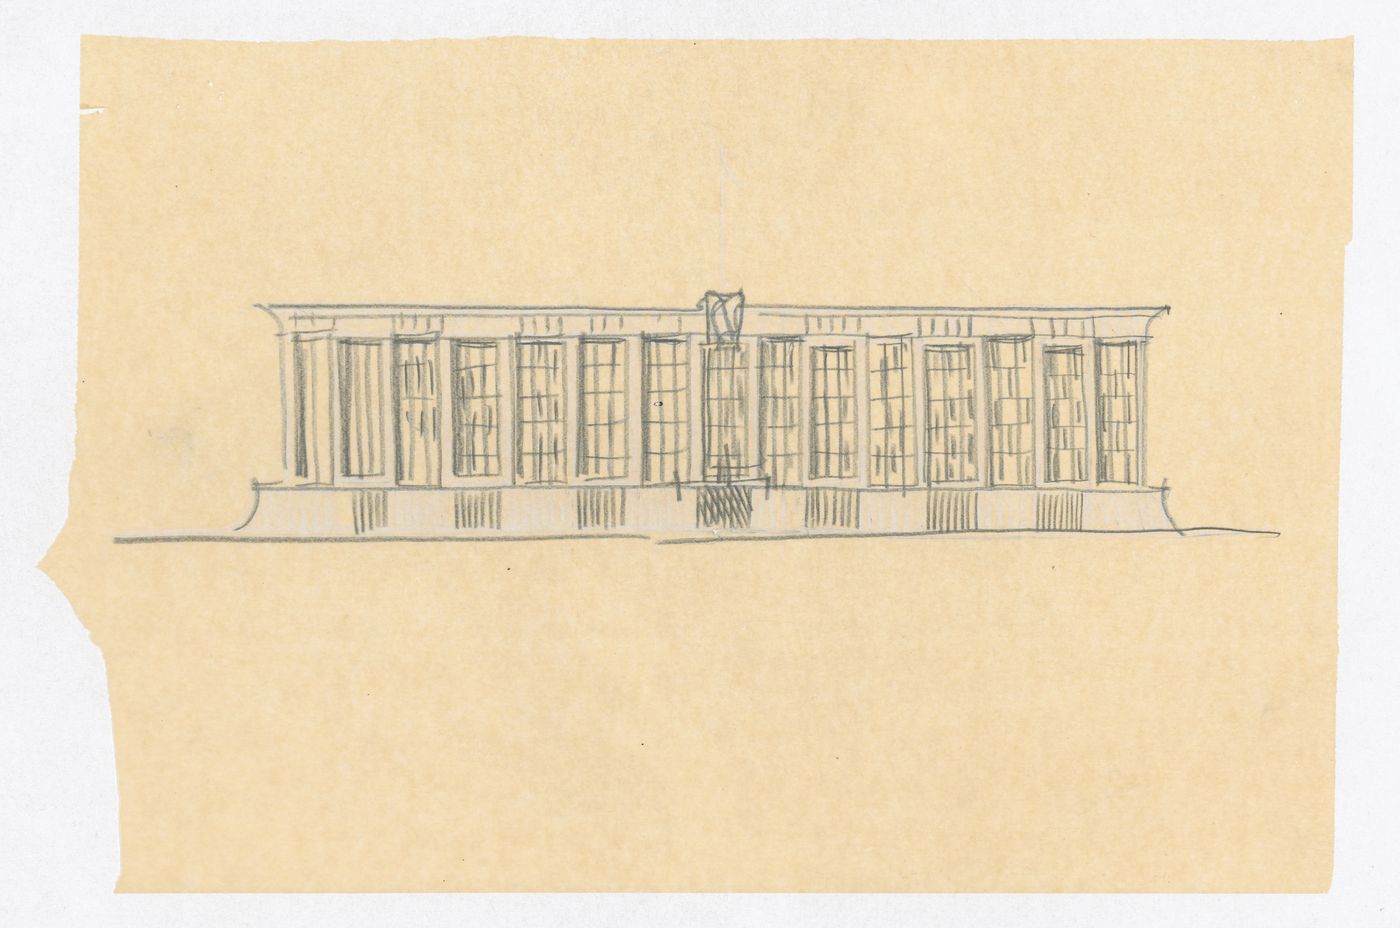 Sketched elevation, United States Chancellery Building, London, England